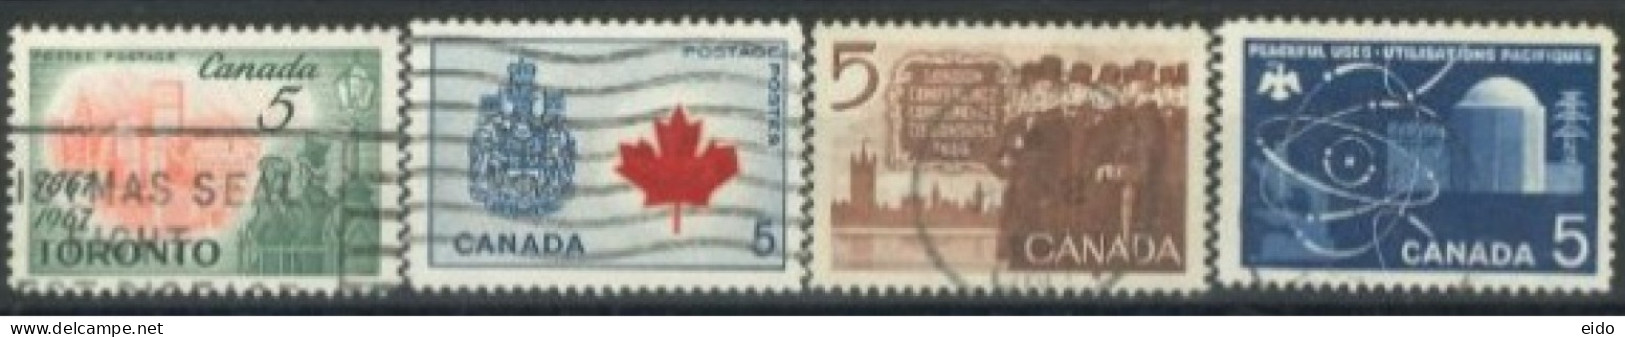 CANADA - 1964/67, STAMPS SET OF 4, USED. - Used Stamps